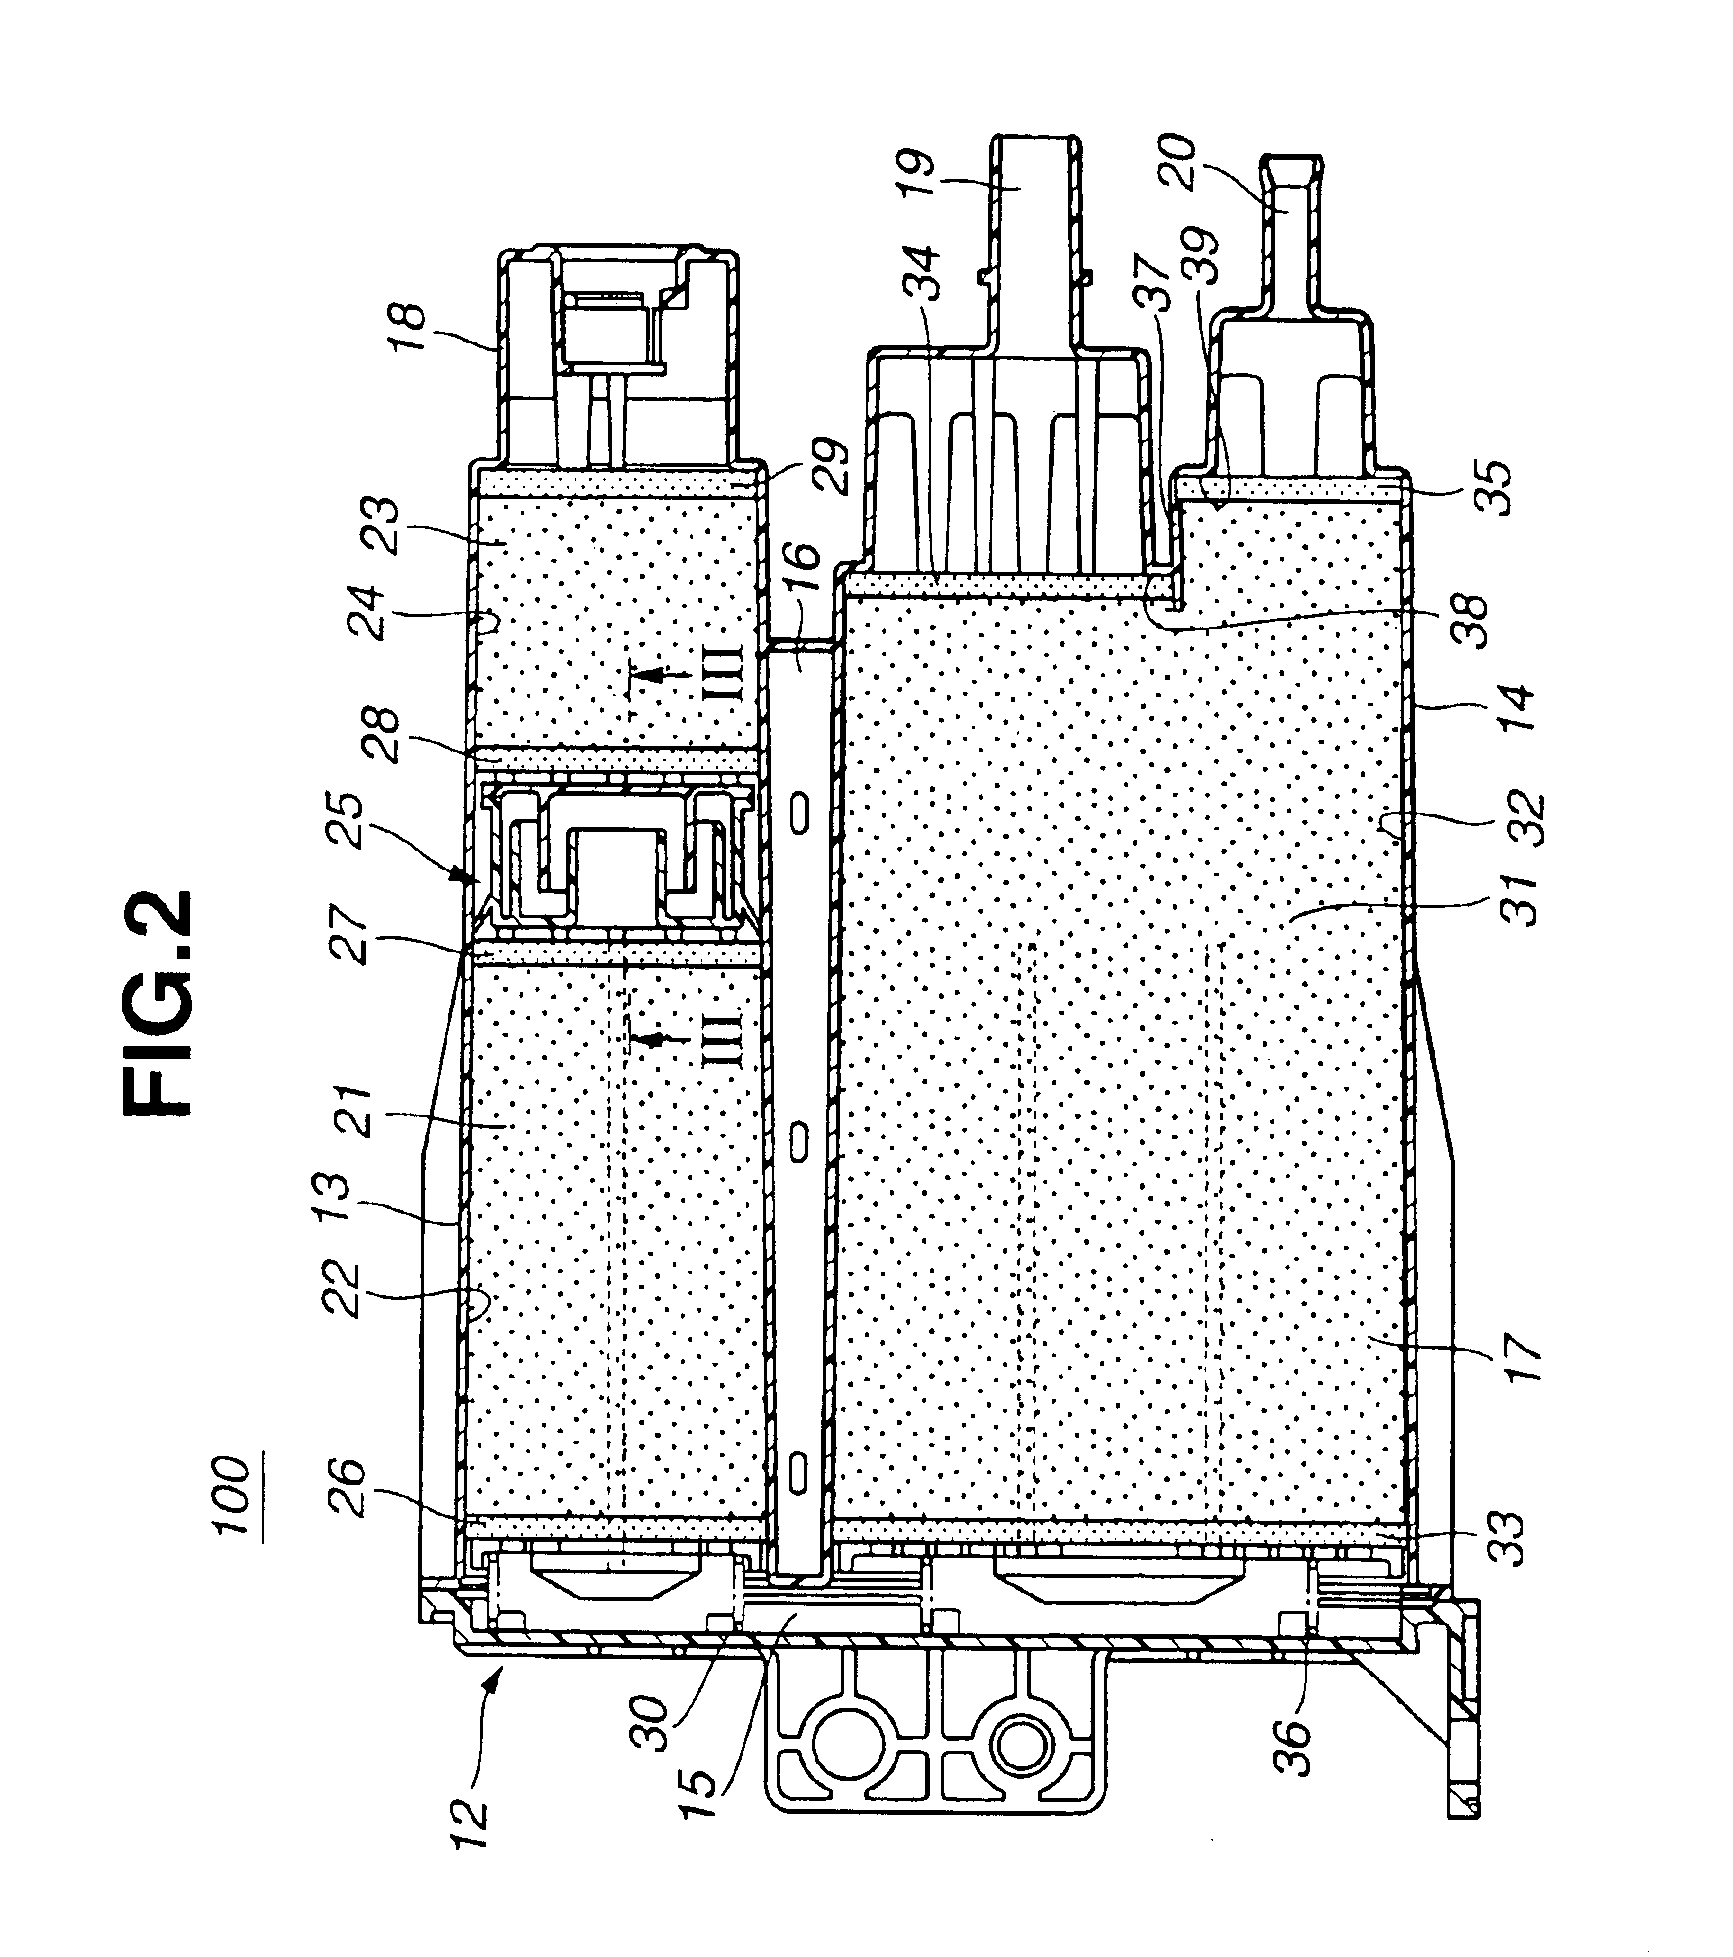 Carbon canister for use in evaporative emission control system of internal combustion engine